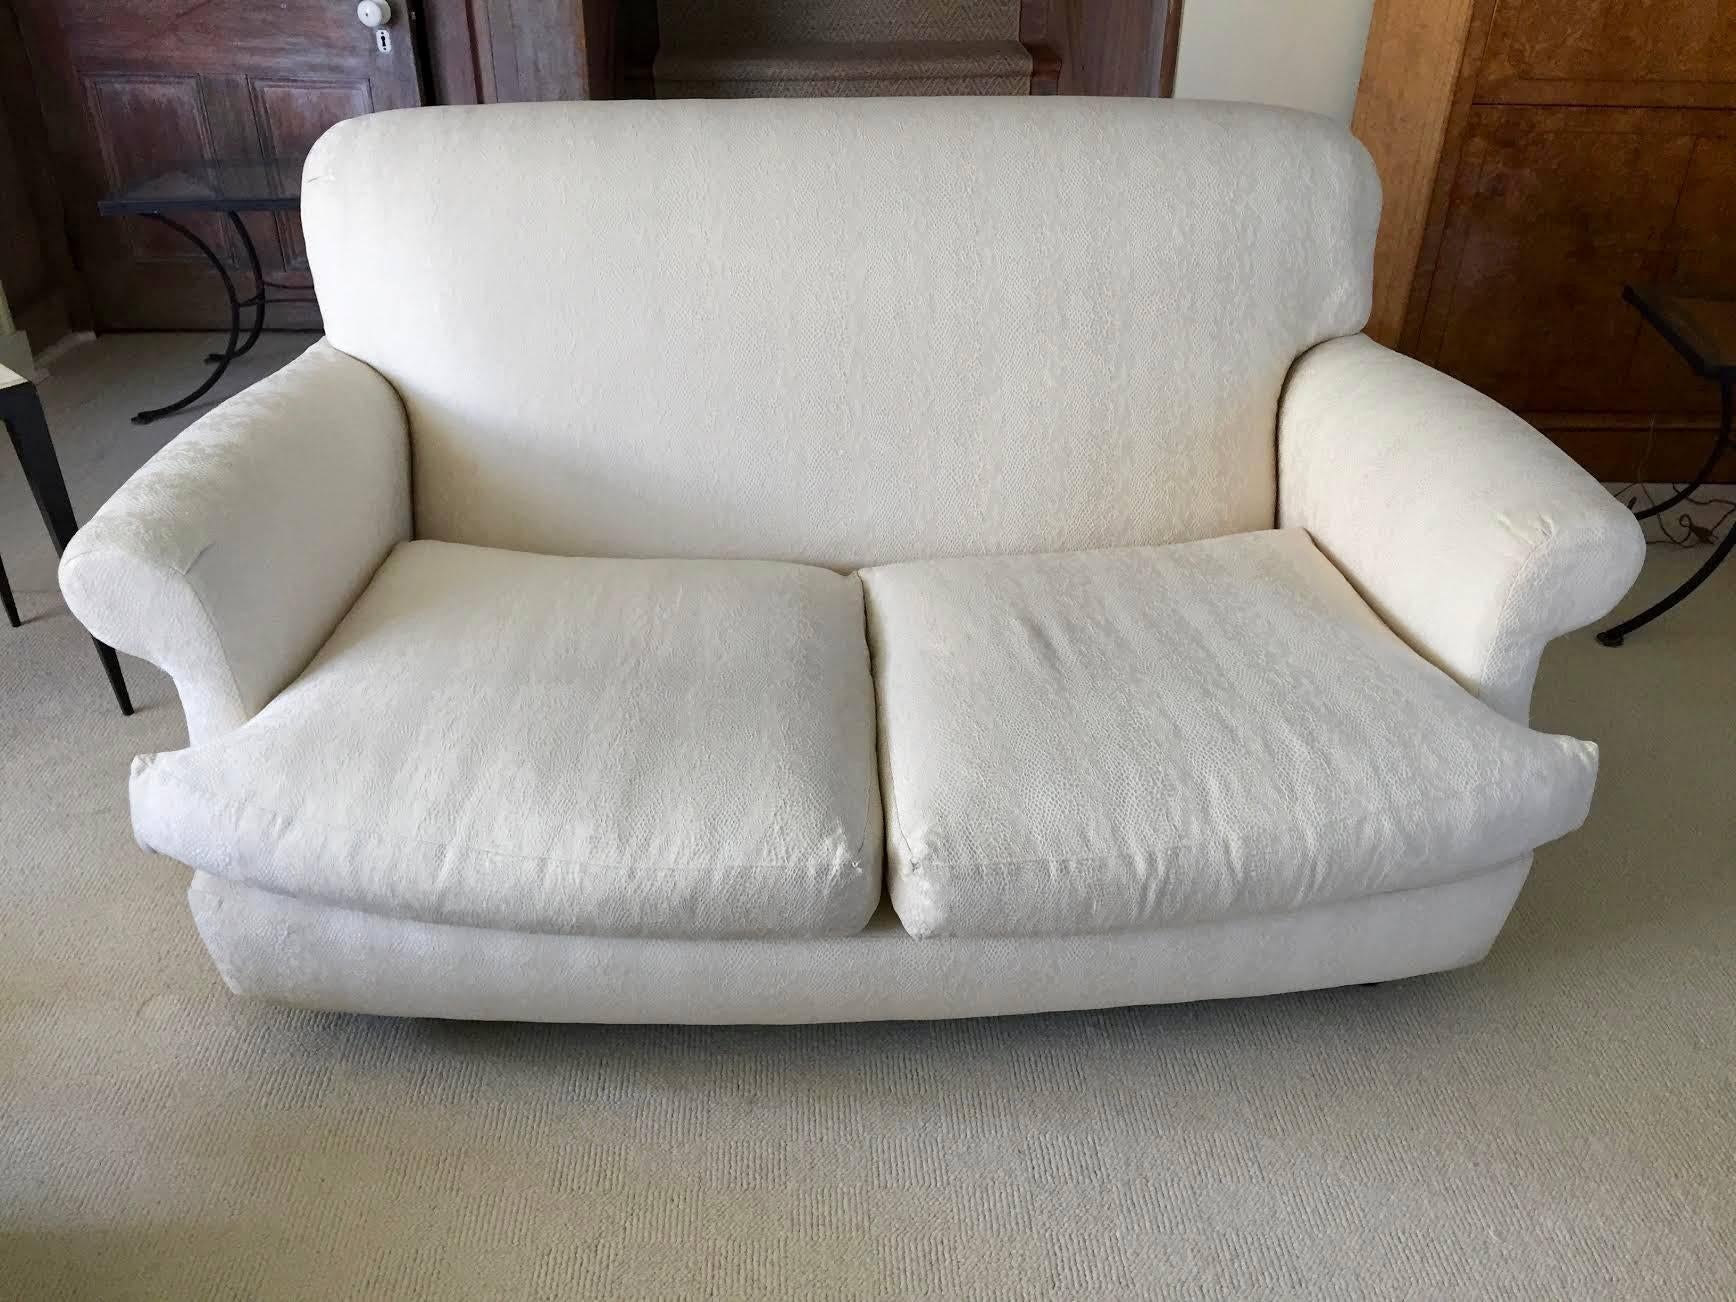 Vintage Palazzetti Loveseat  In Good Condition For Sale In Quogue, NY